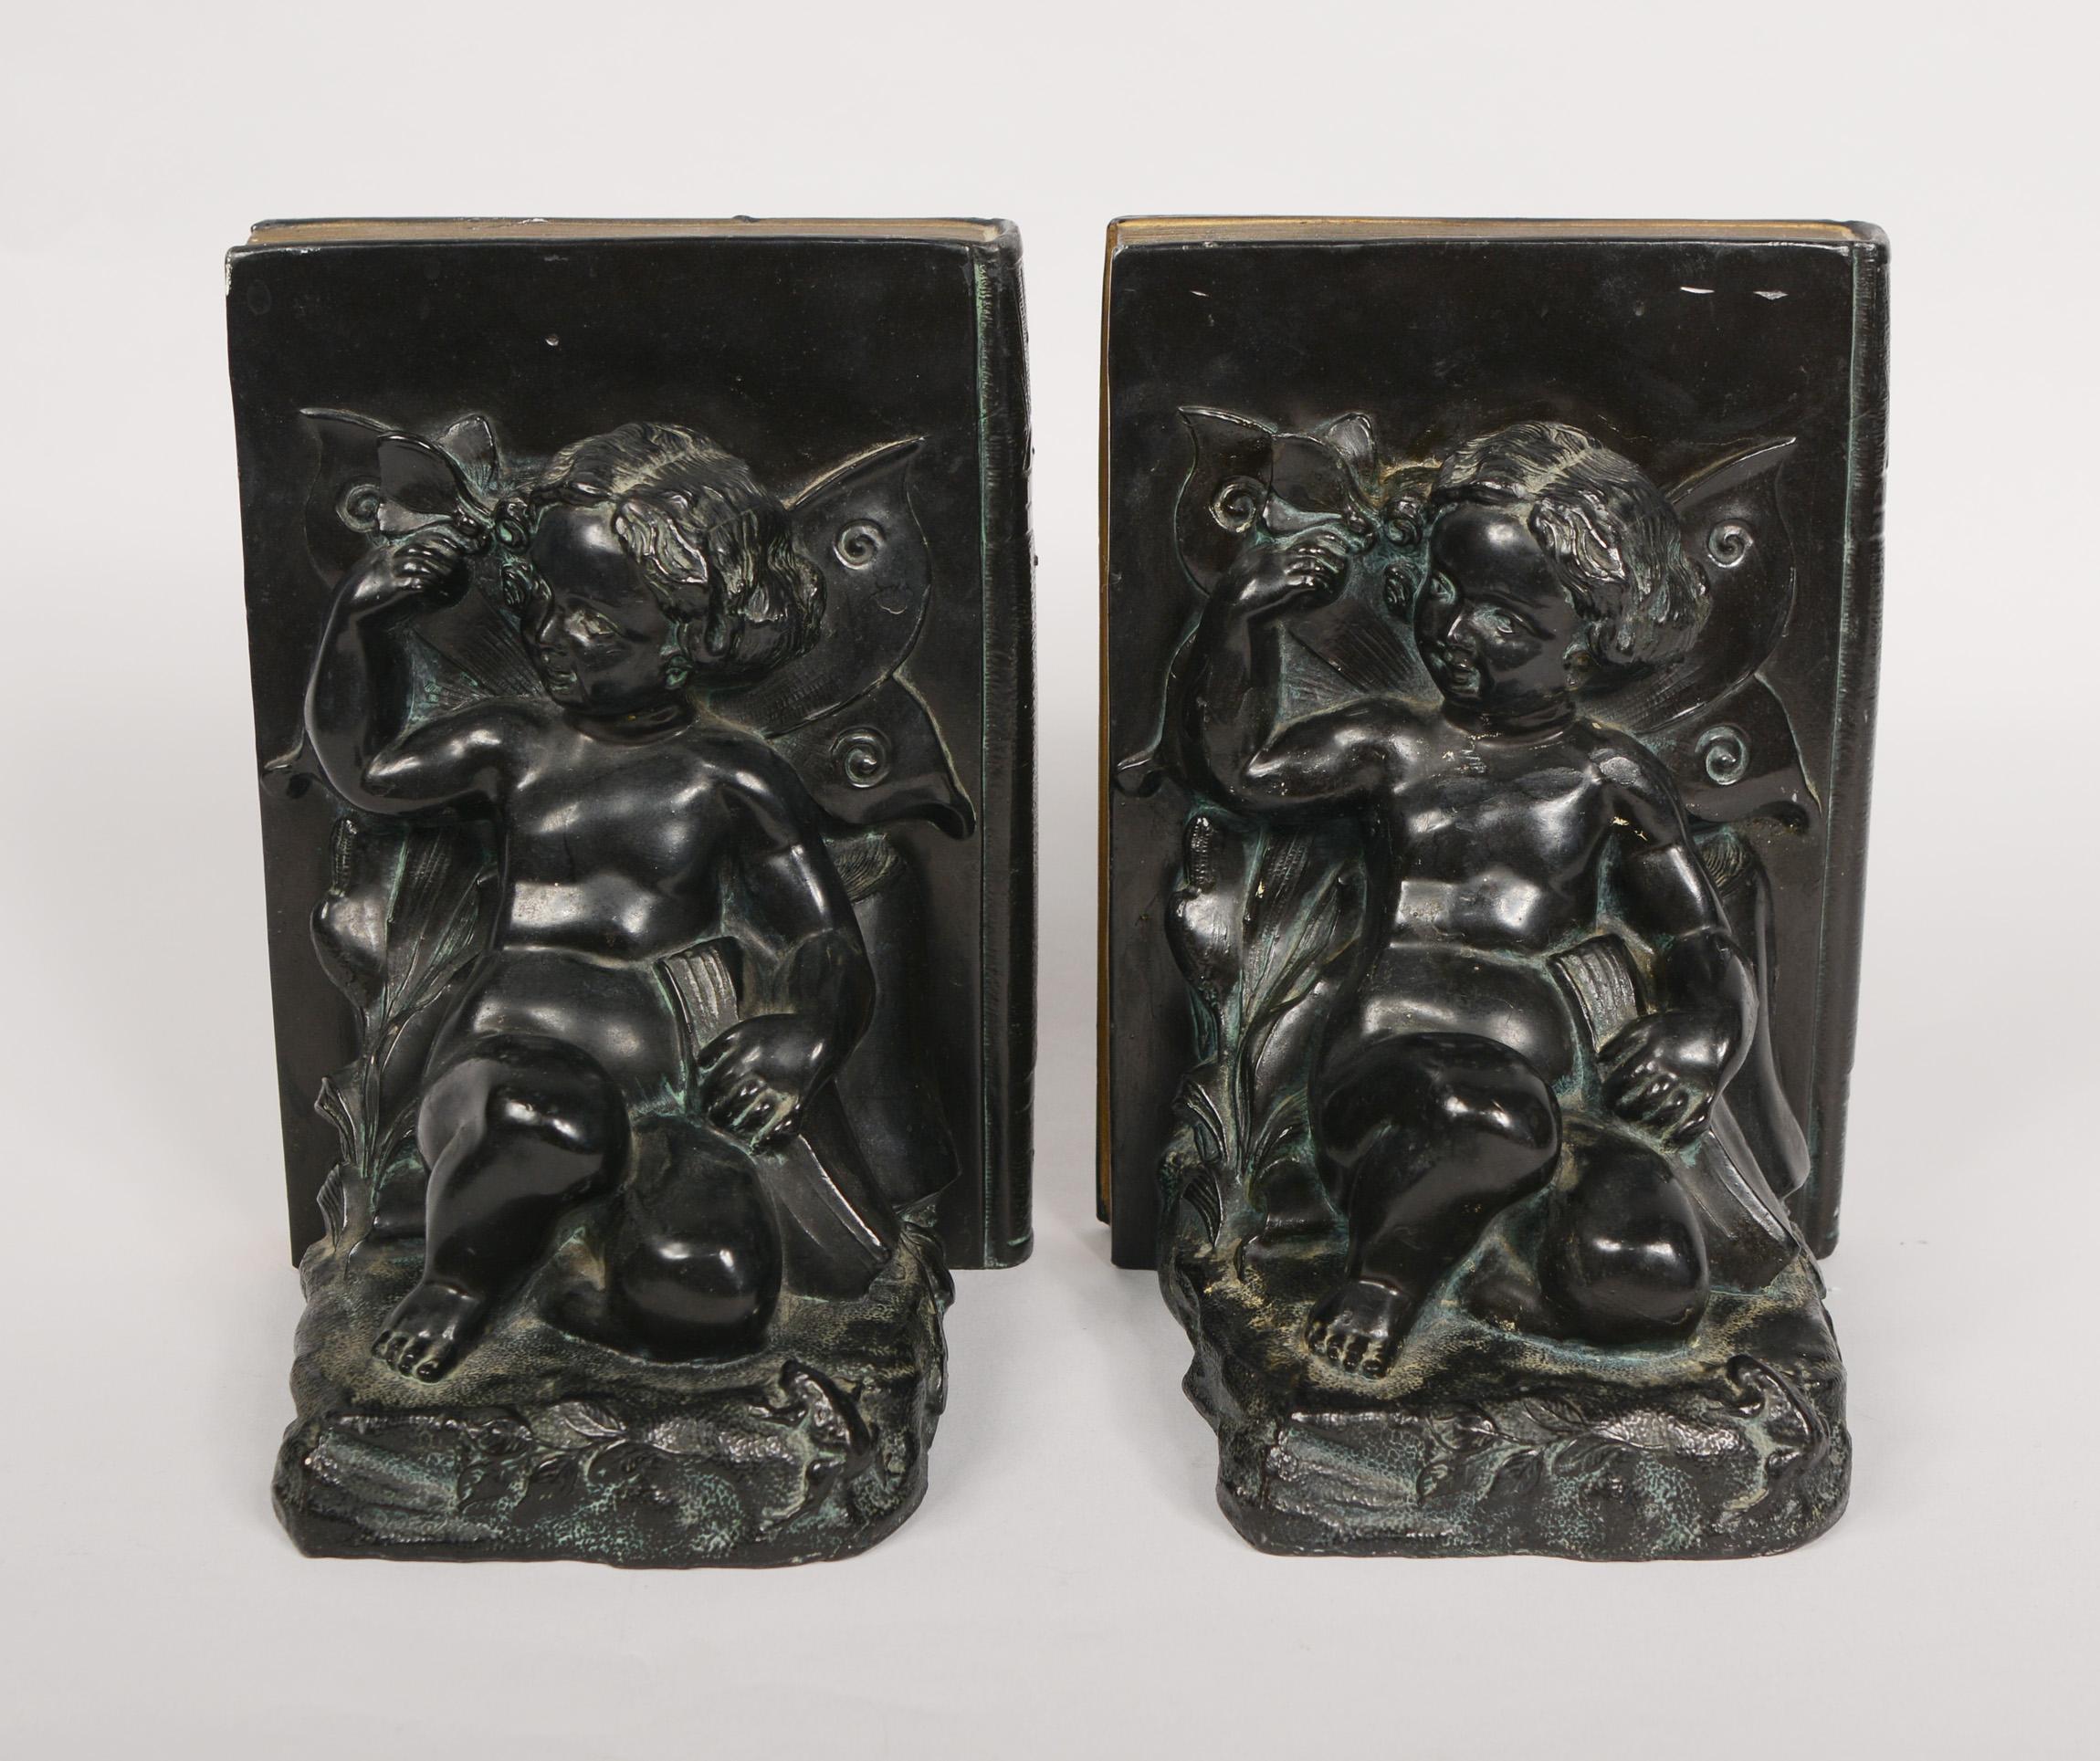 Pair of white metal bookends by Ronson Art Metal Works. These have a cherub with butterfly wings. She is holding a butterfly in one hand and a book in the other. There is a frog looking up at her. These are art nouveau in style with a art deco